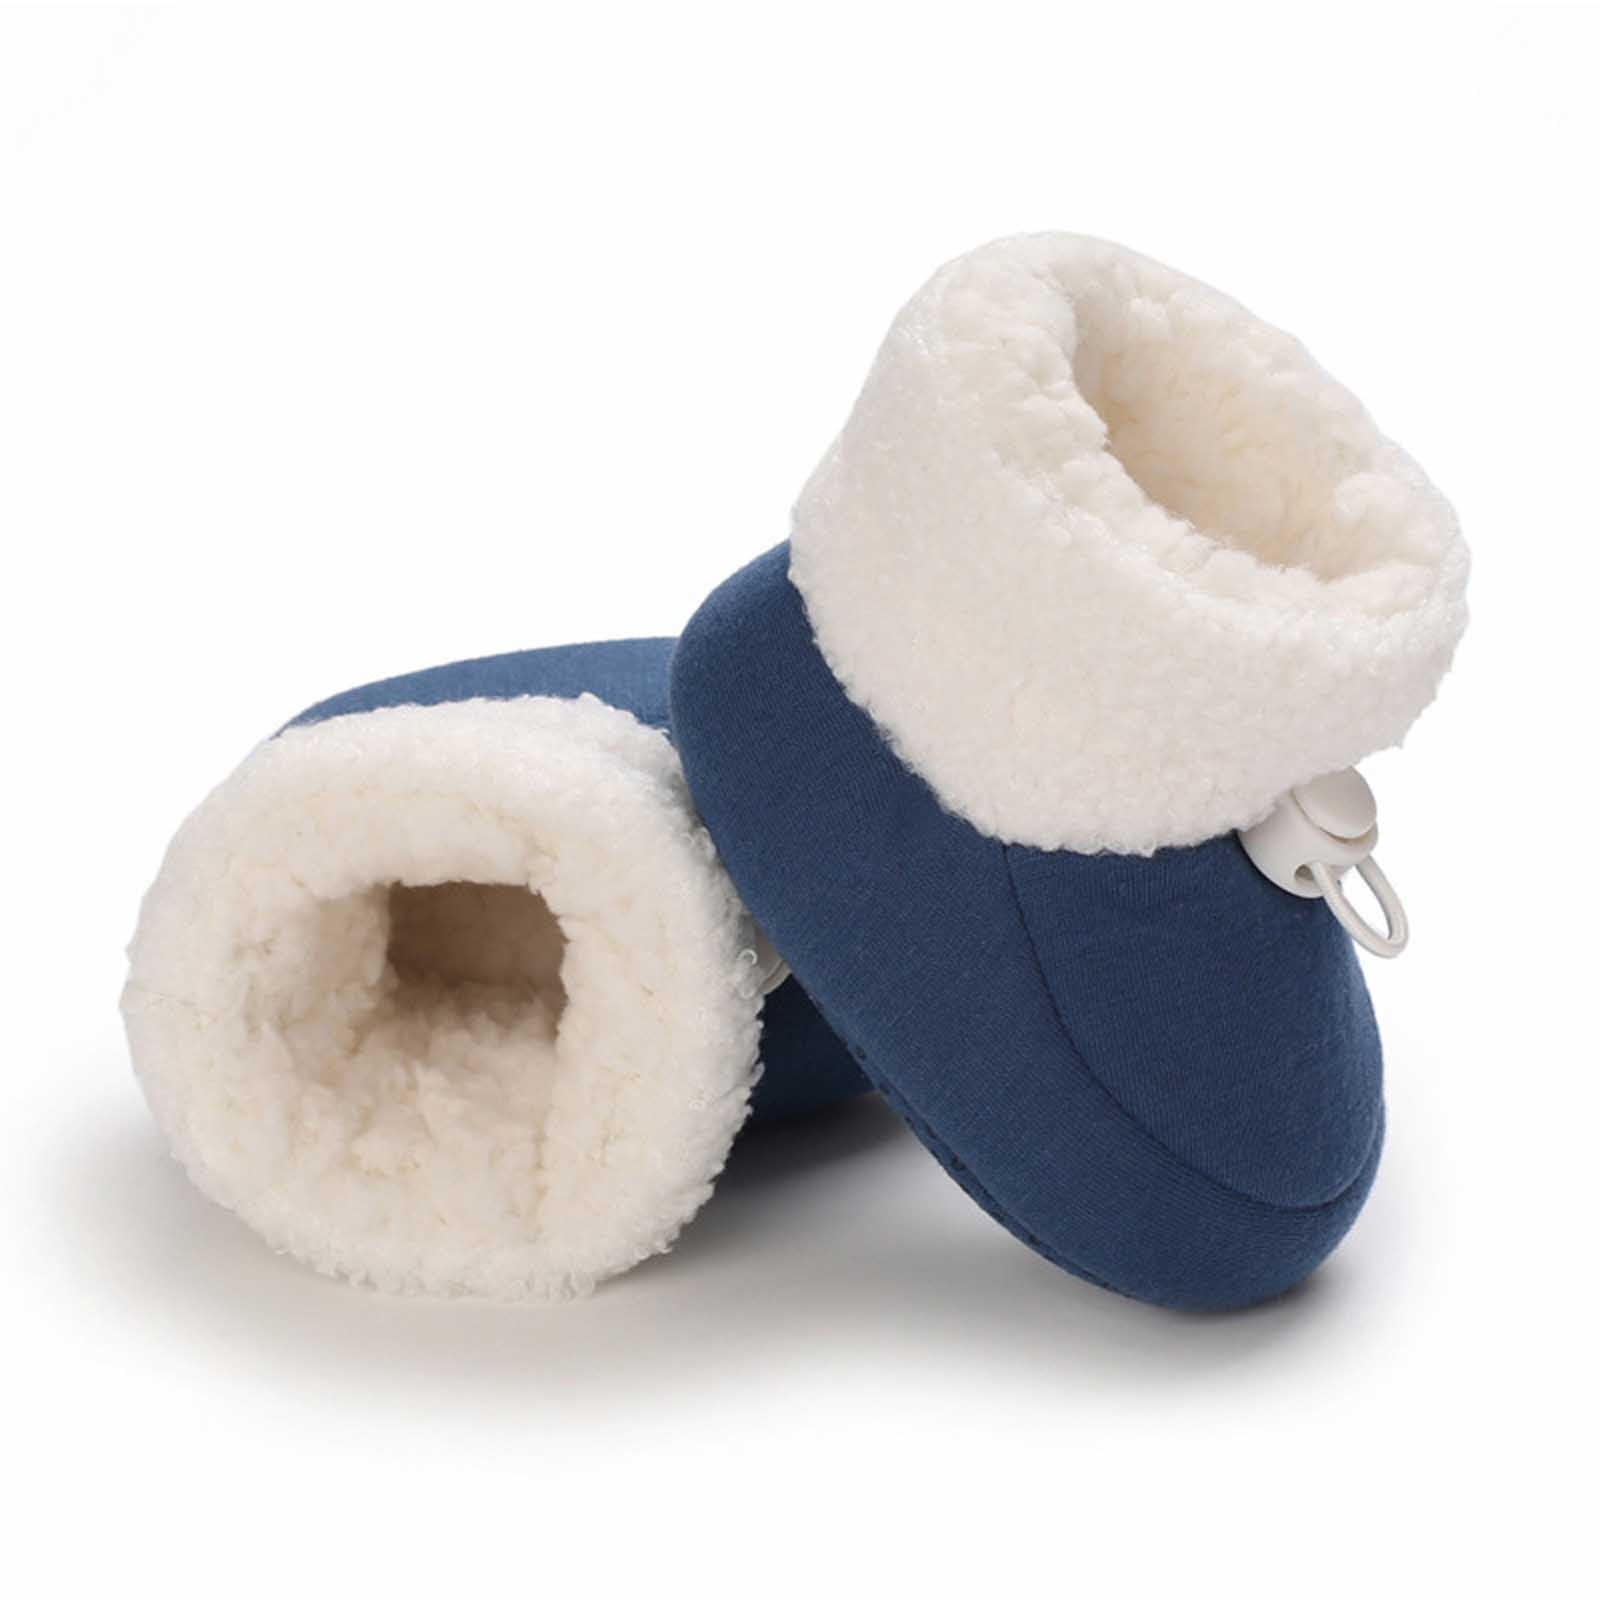 Baby Booties TMEOG Newborn Baby Girl Soft Fleece Cozy Boots Non-Skid Lovely Slippers Infant Toddler Unisex First Walkers Winter Warm Shoes 